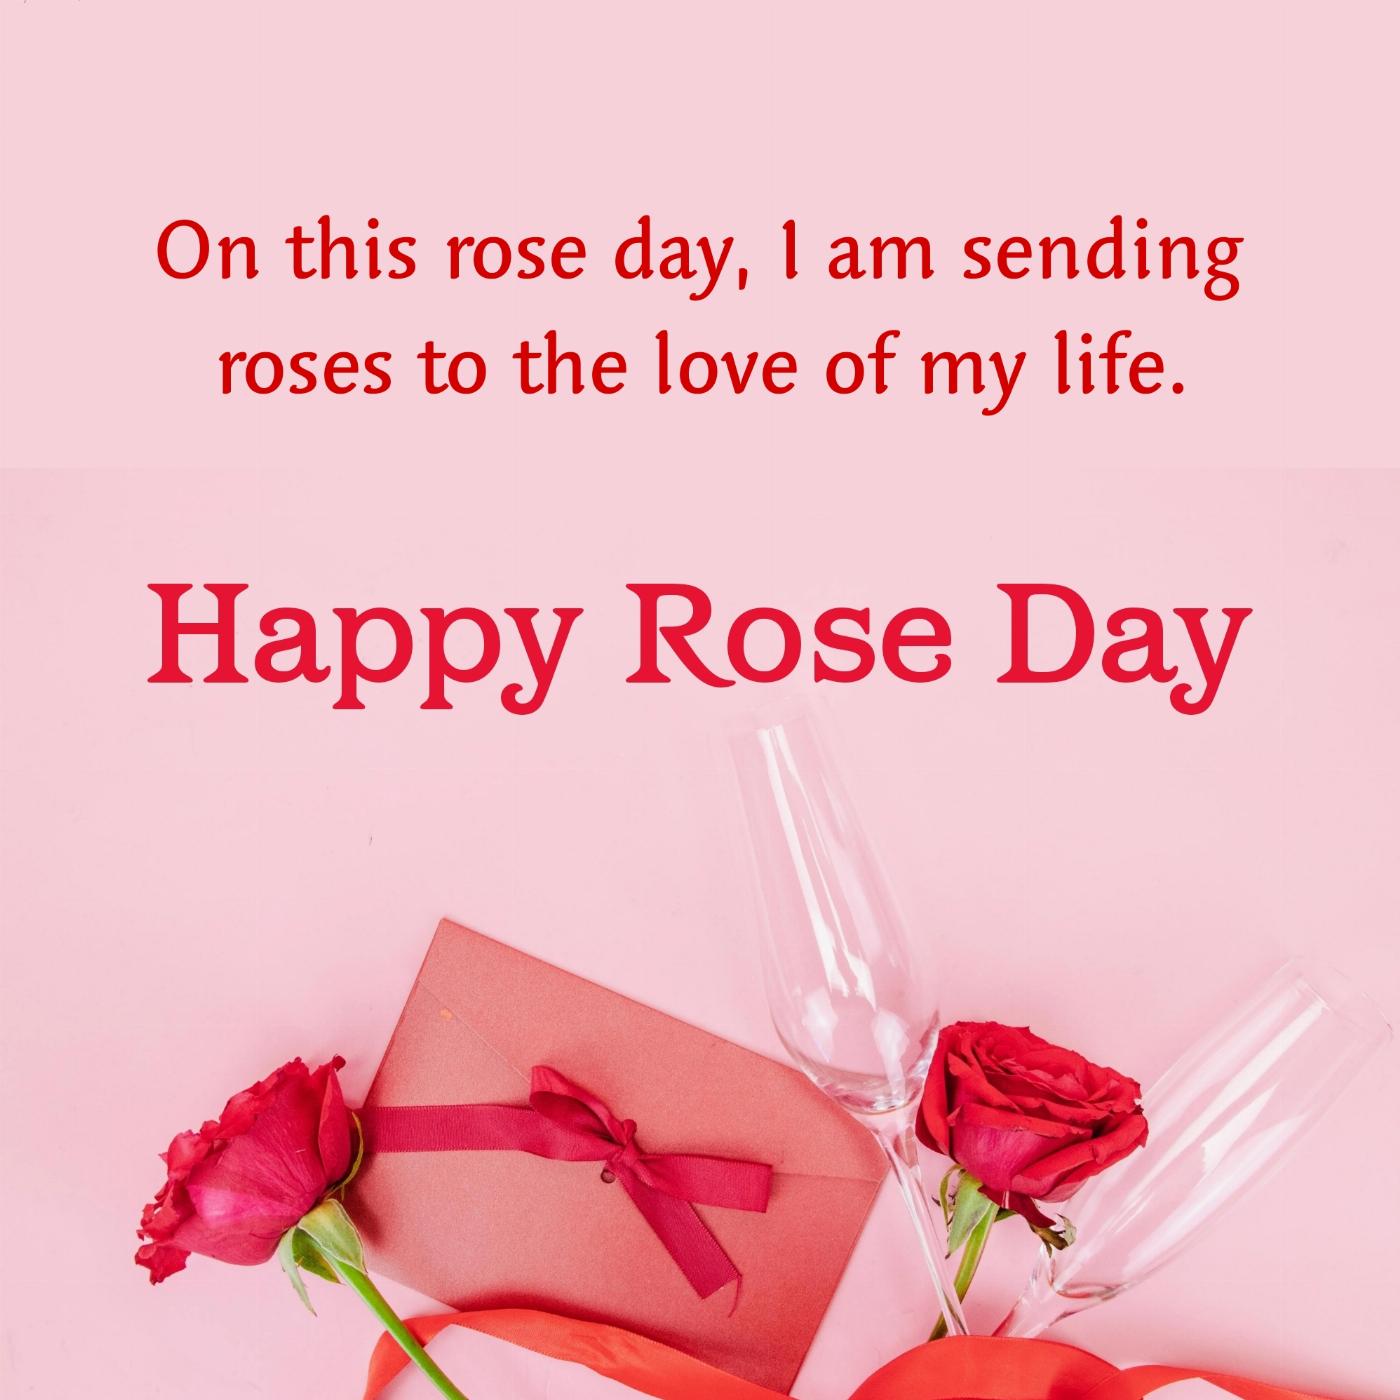 On this rose day I am sending roses to the love of my life